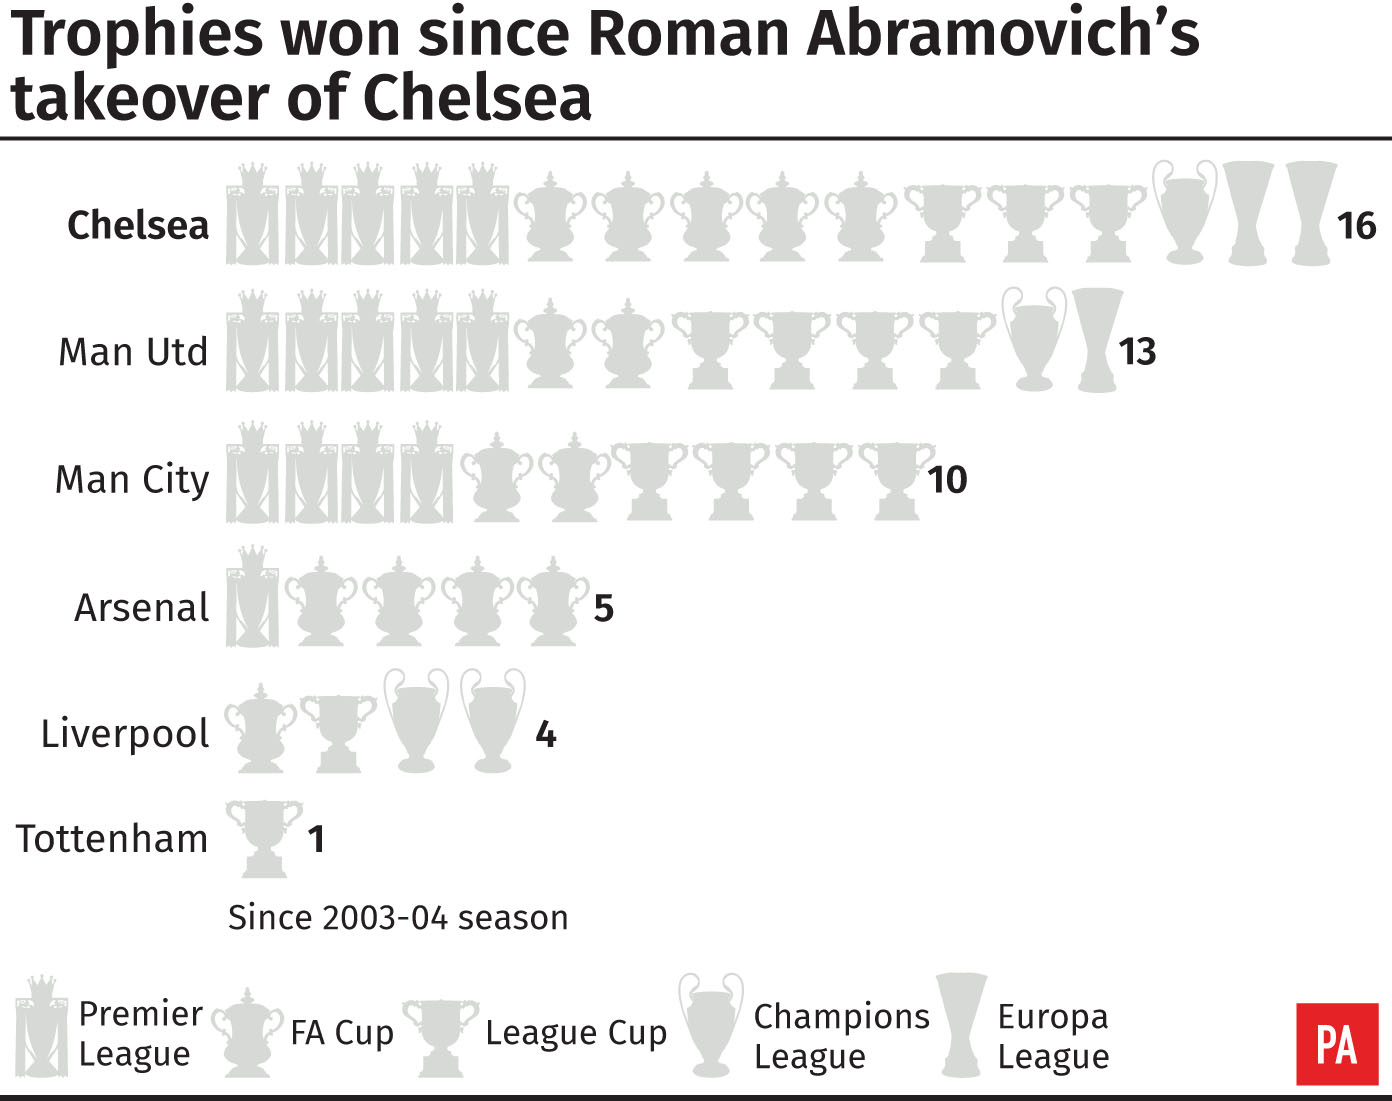 Trophies for the Premier League's 'big six' since Roman Abramovich's Chelsea takeover